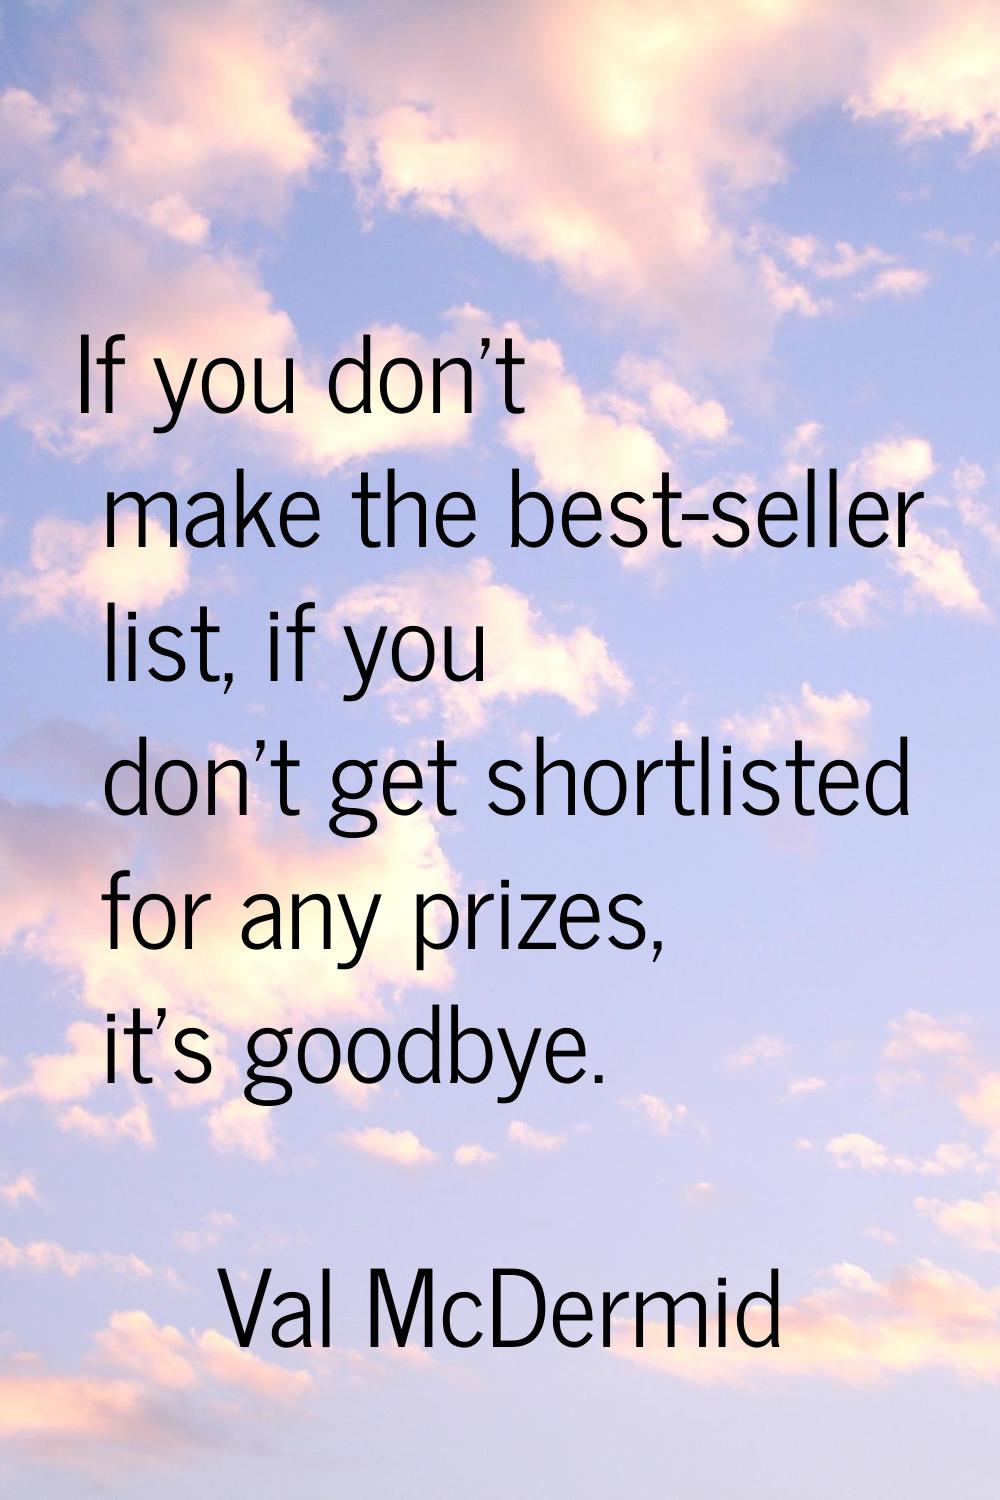 If you don't make the best-seller list, if you don't get shortlisted for any prizes, it's goodbye.